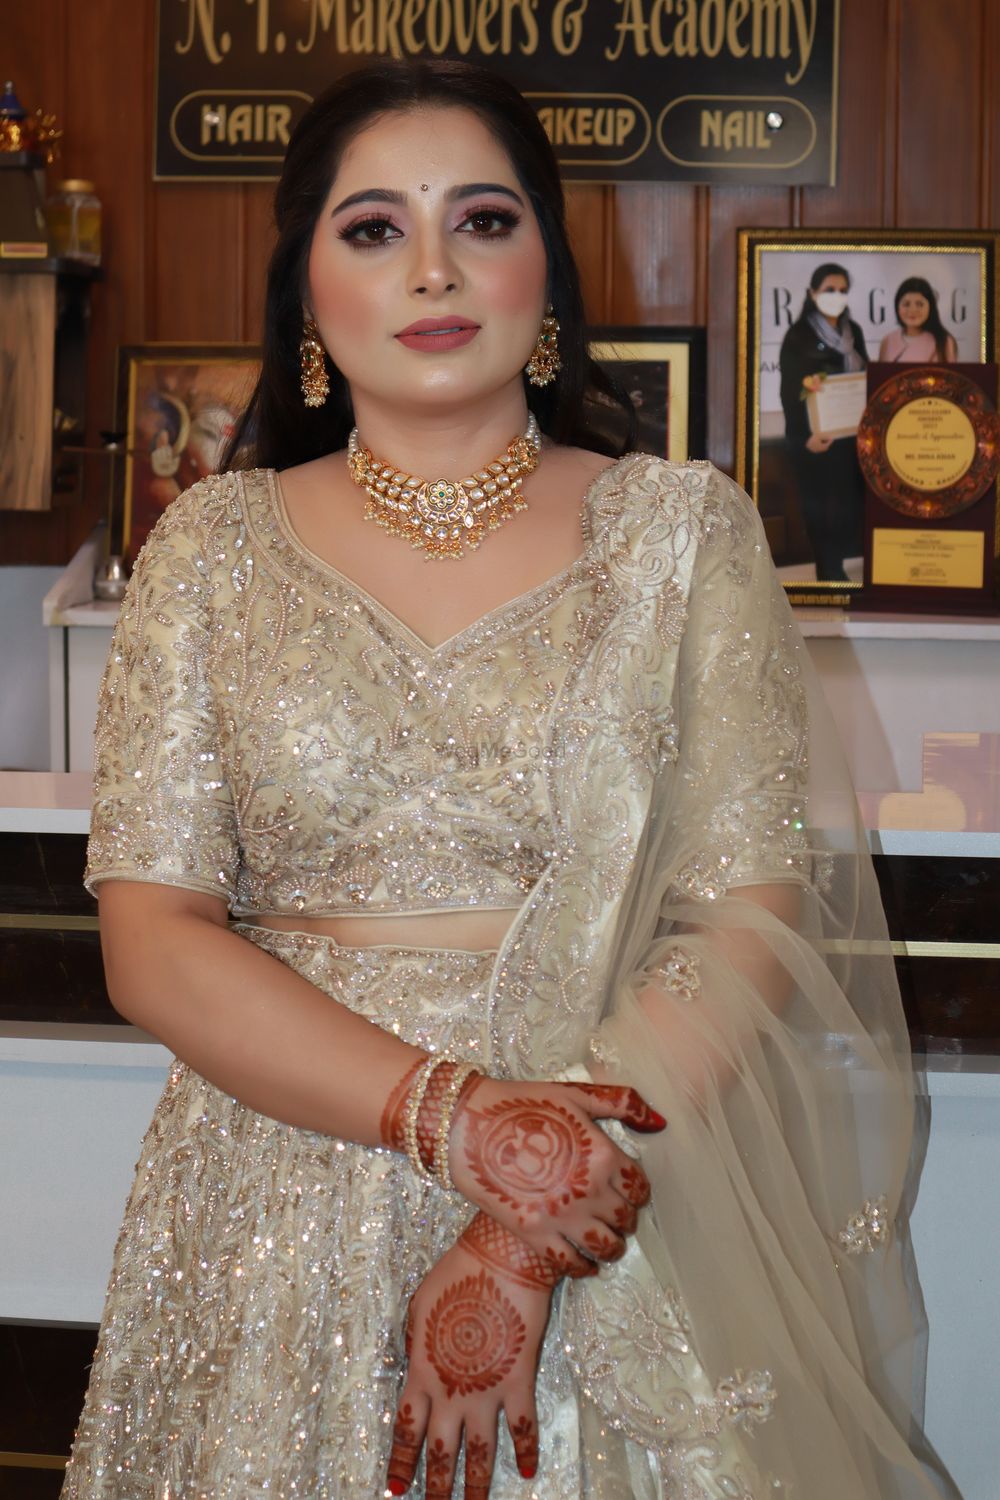 Photo From Engagement look - By Neeru Tiwari Makeovers